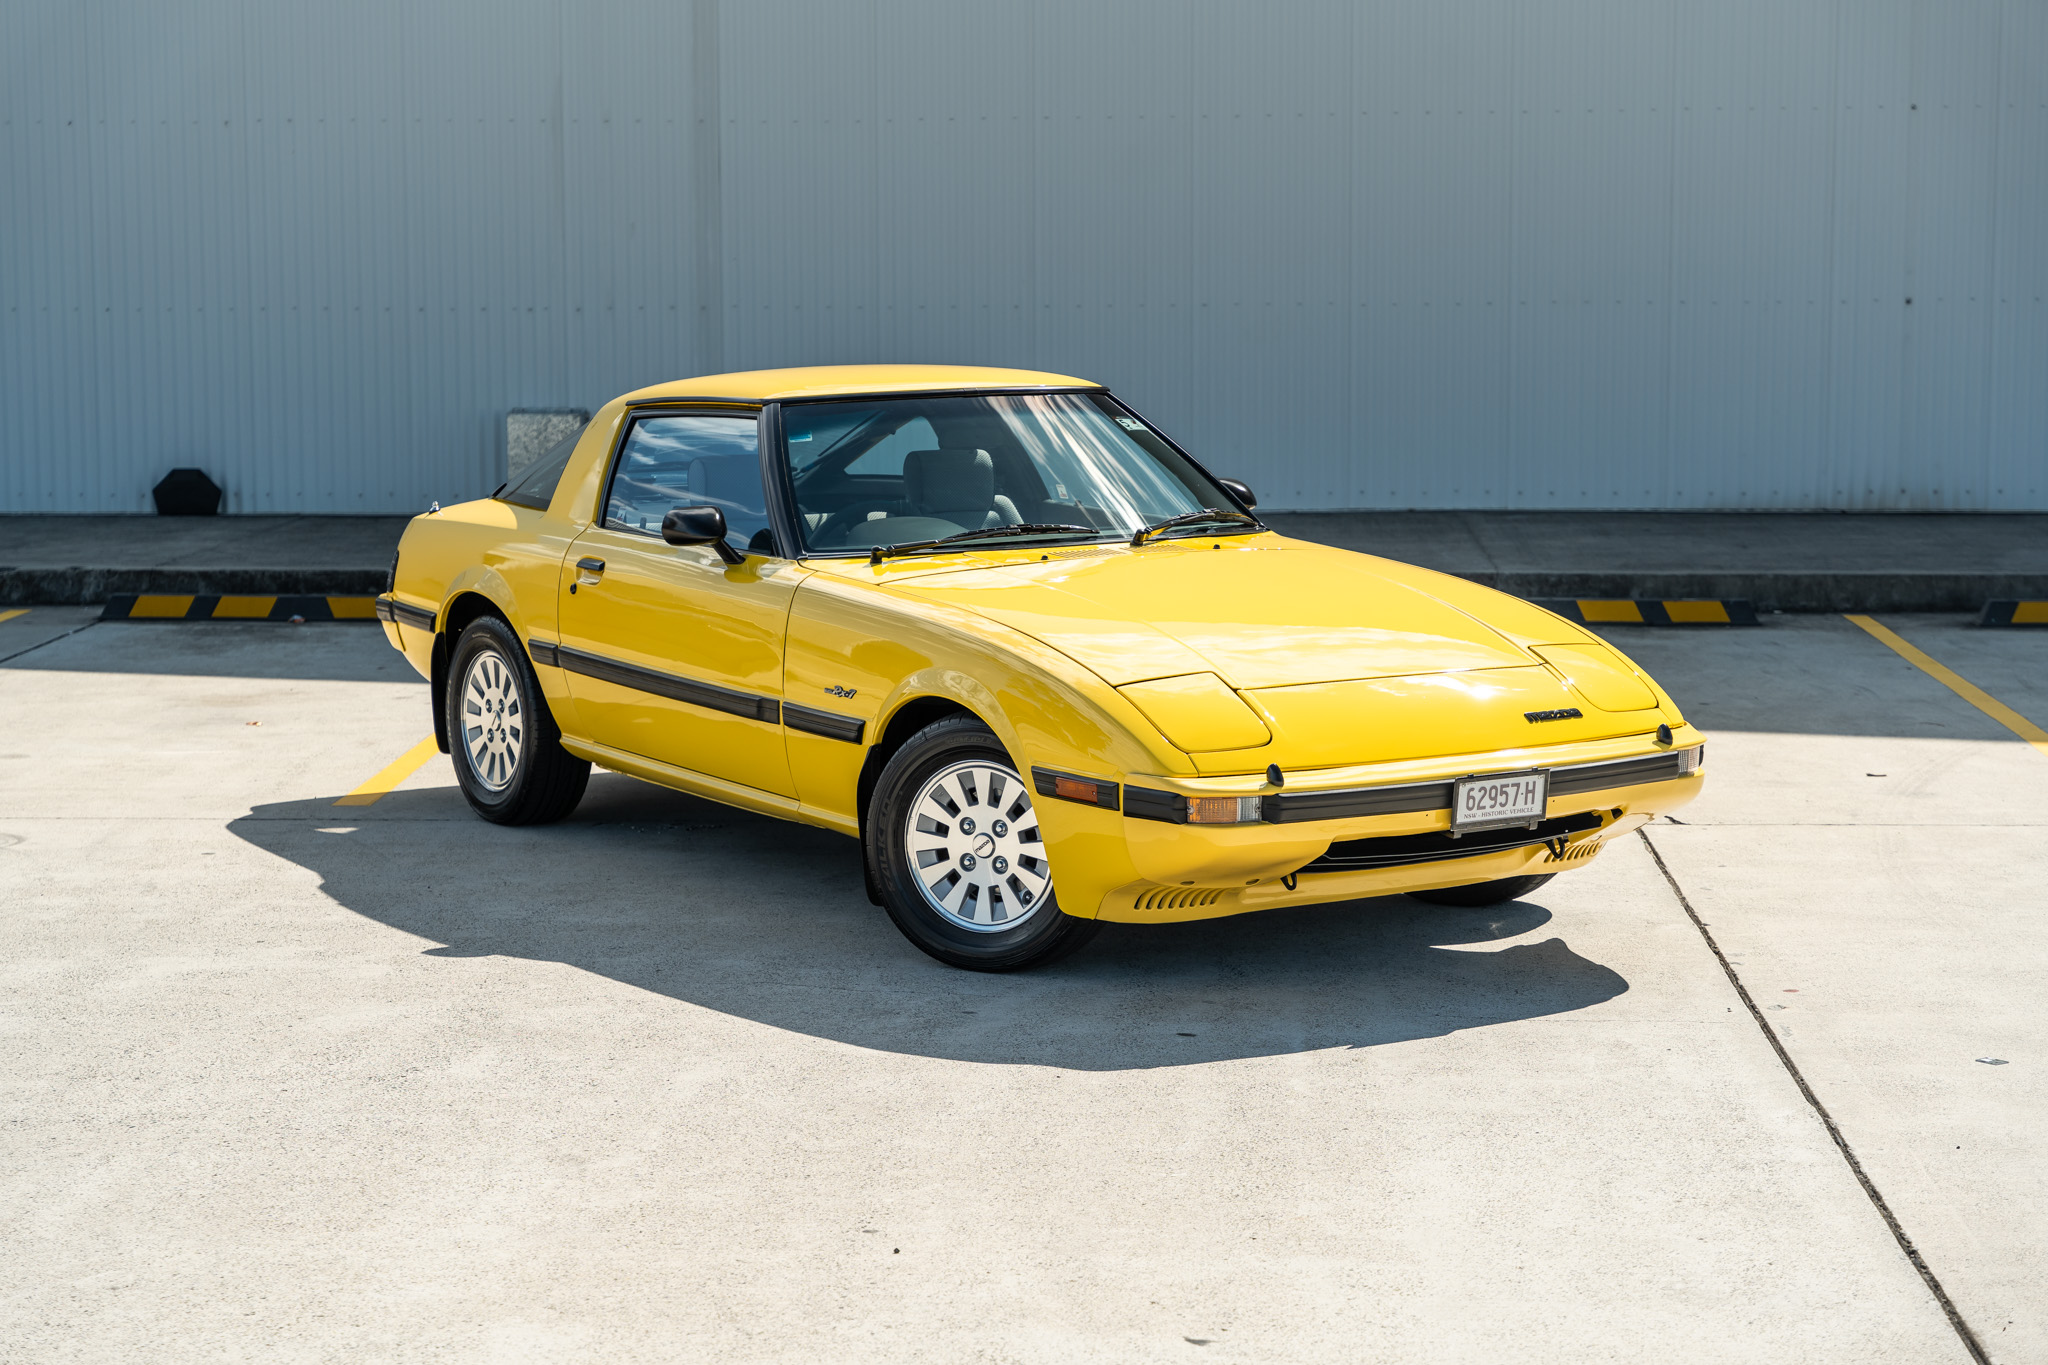 1985 Mazda RX-7 Series 3 for sale by auction in Revesby, NSW 